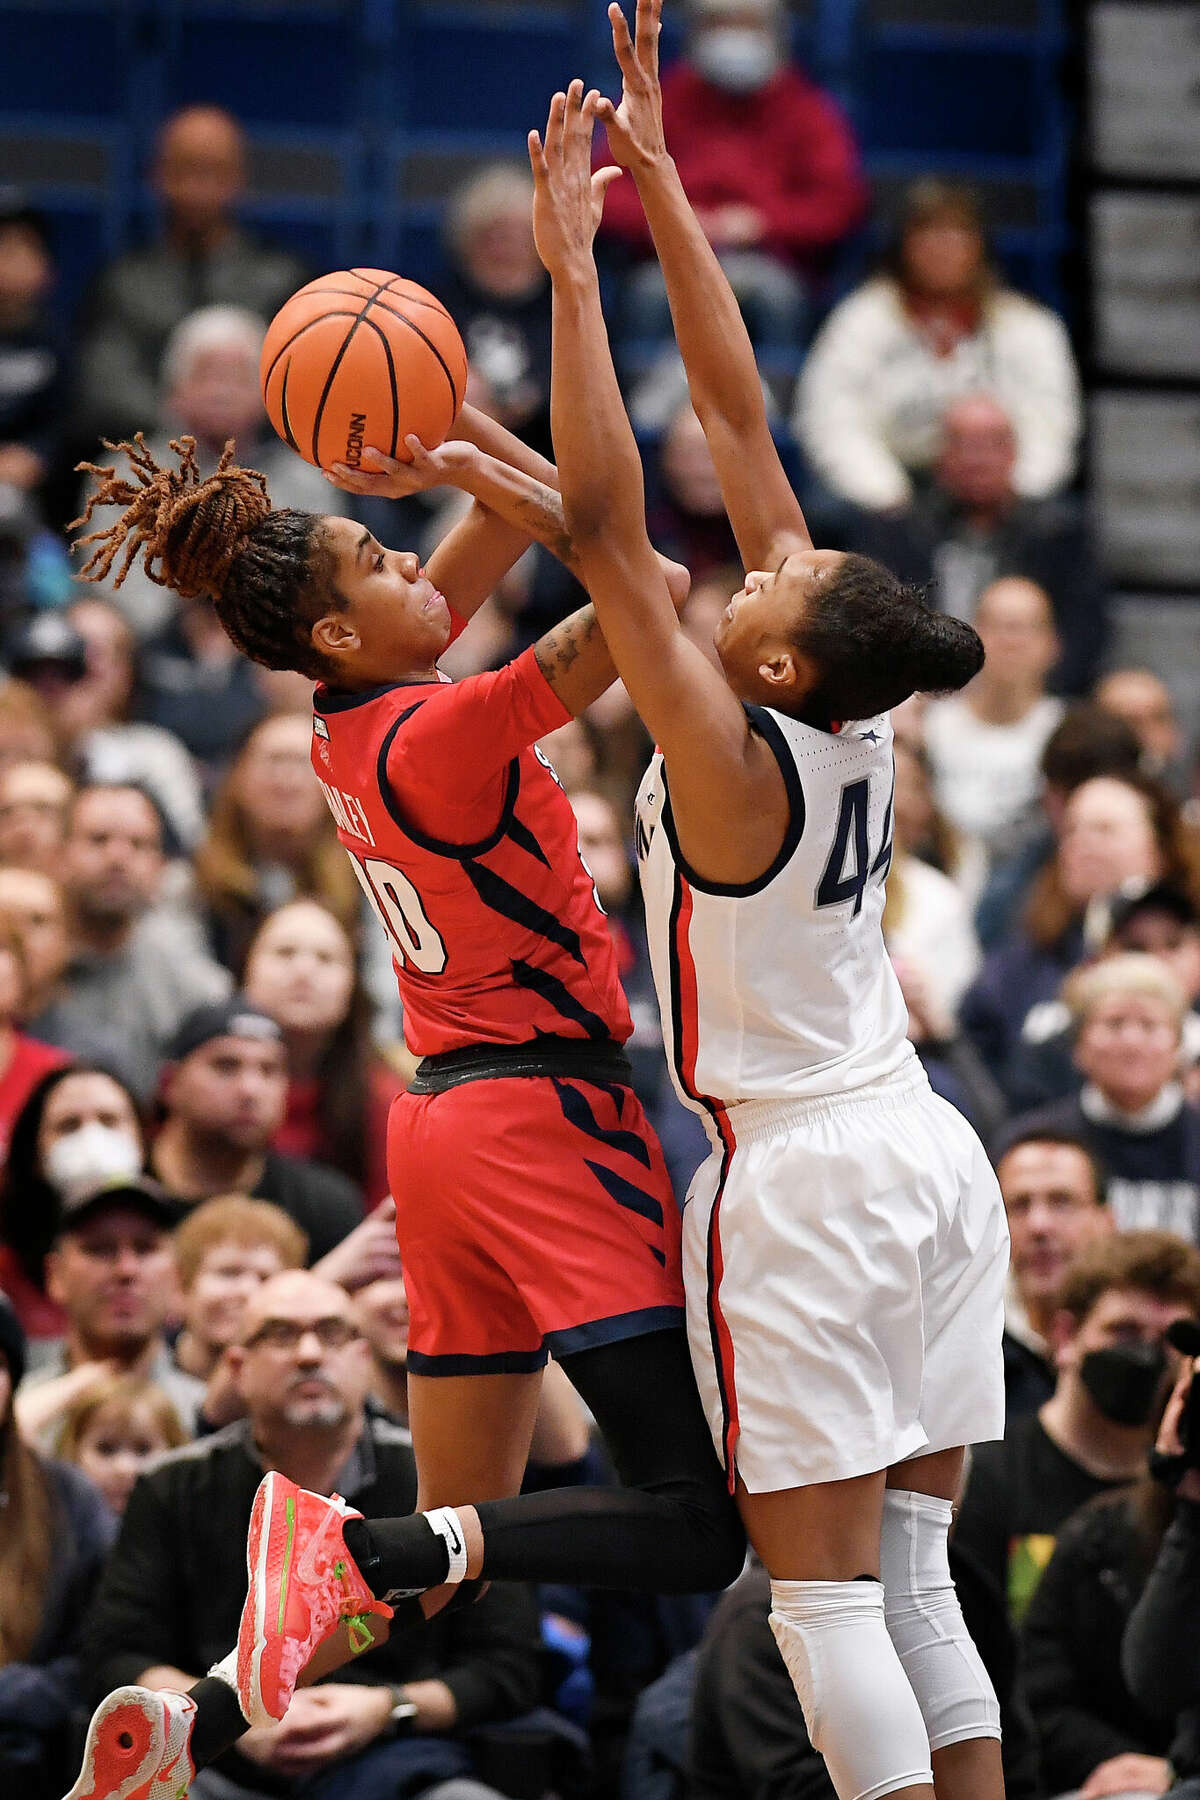 St. John's Kadaja Bailey (30) shoots over UConn's Aubrey Griffin (44) in the first half of an NCAA college basketball game, Tuesday, Feb. 21, 2023, in Hartford, Conn. (AP Photo/Jessica Hill)